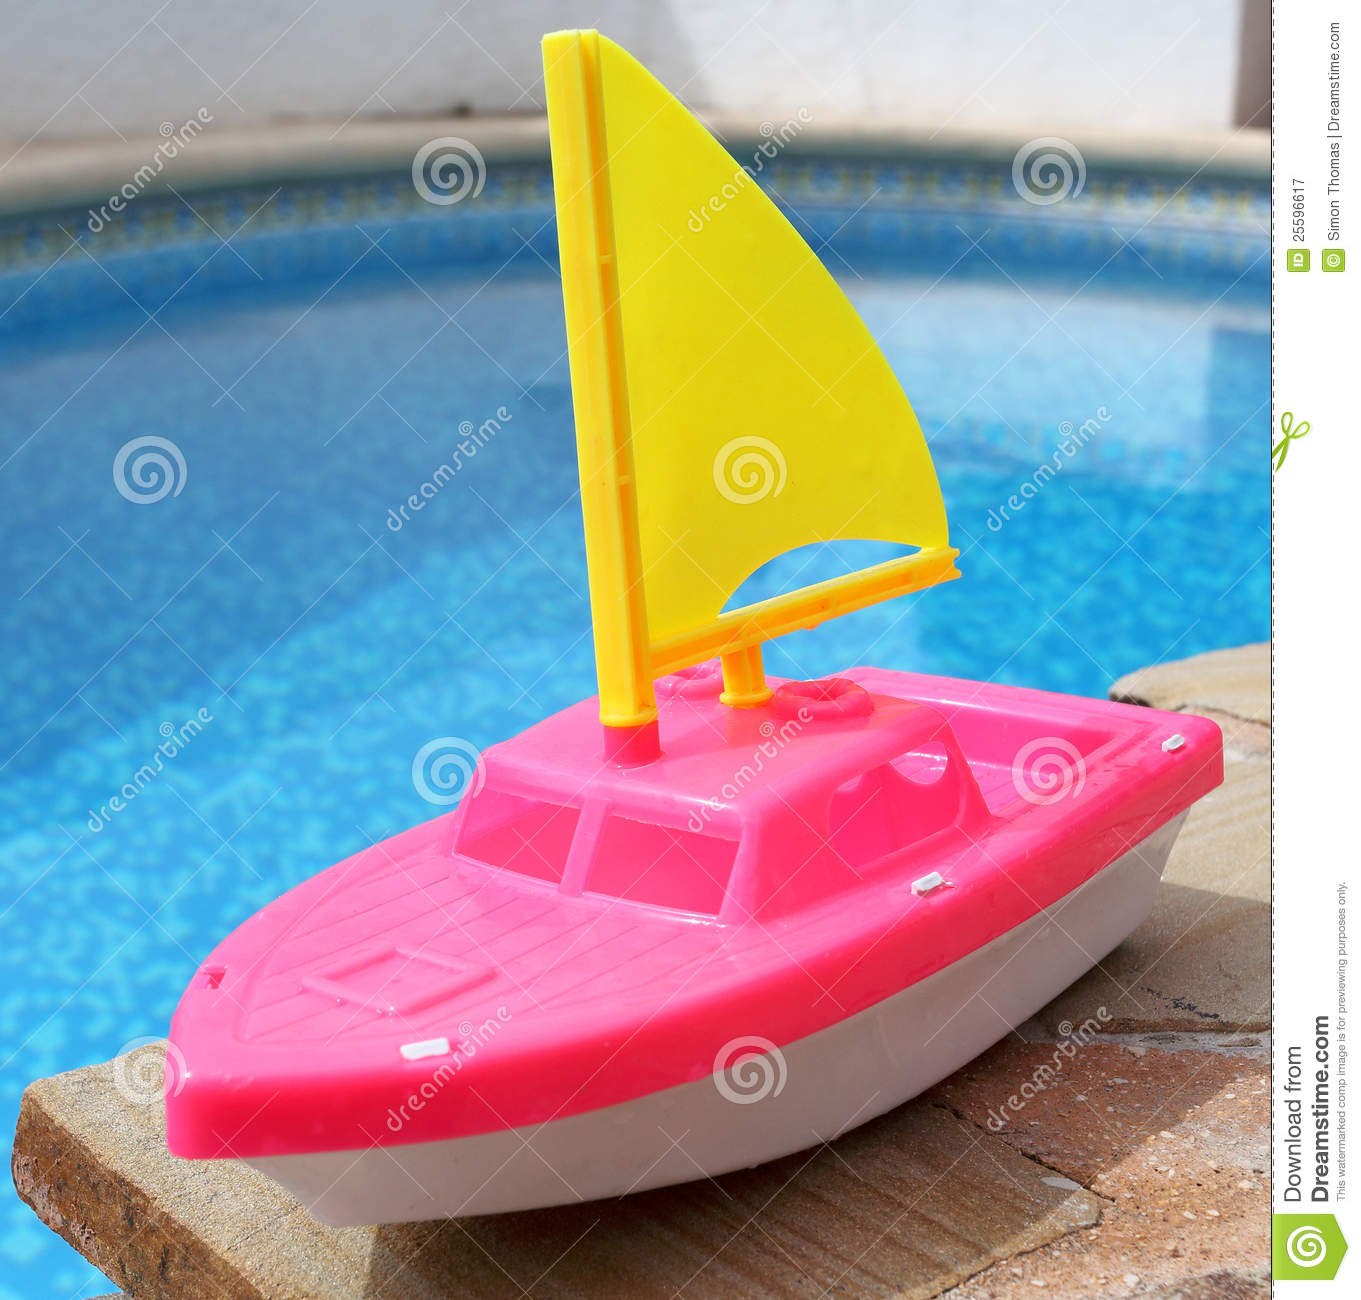 Toy Boat Royalty Free Stock Photography   Image  25596617